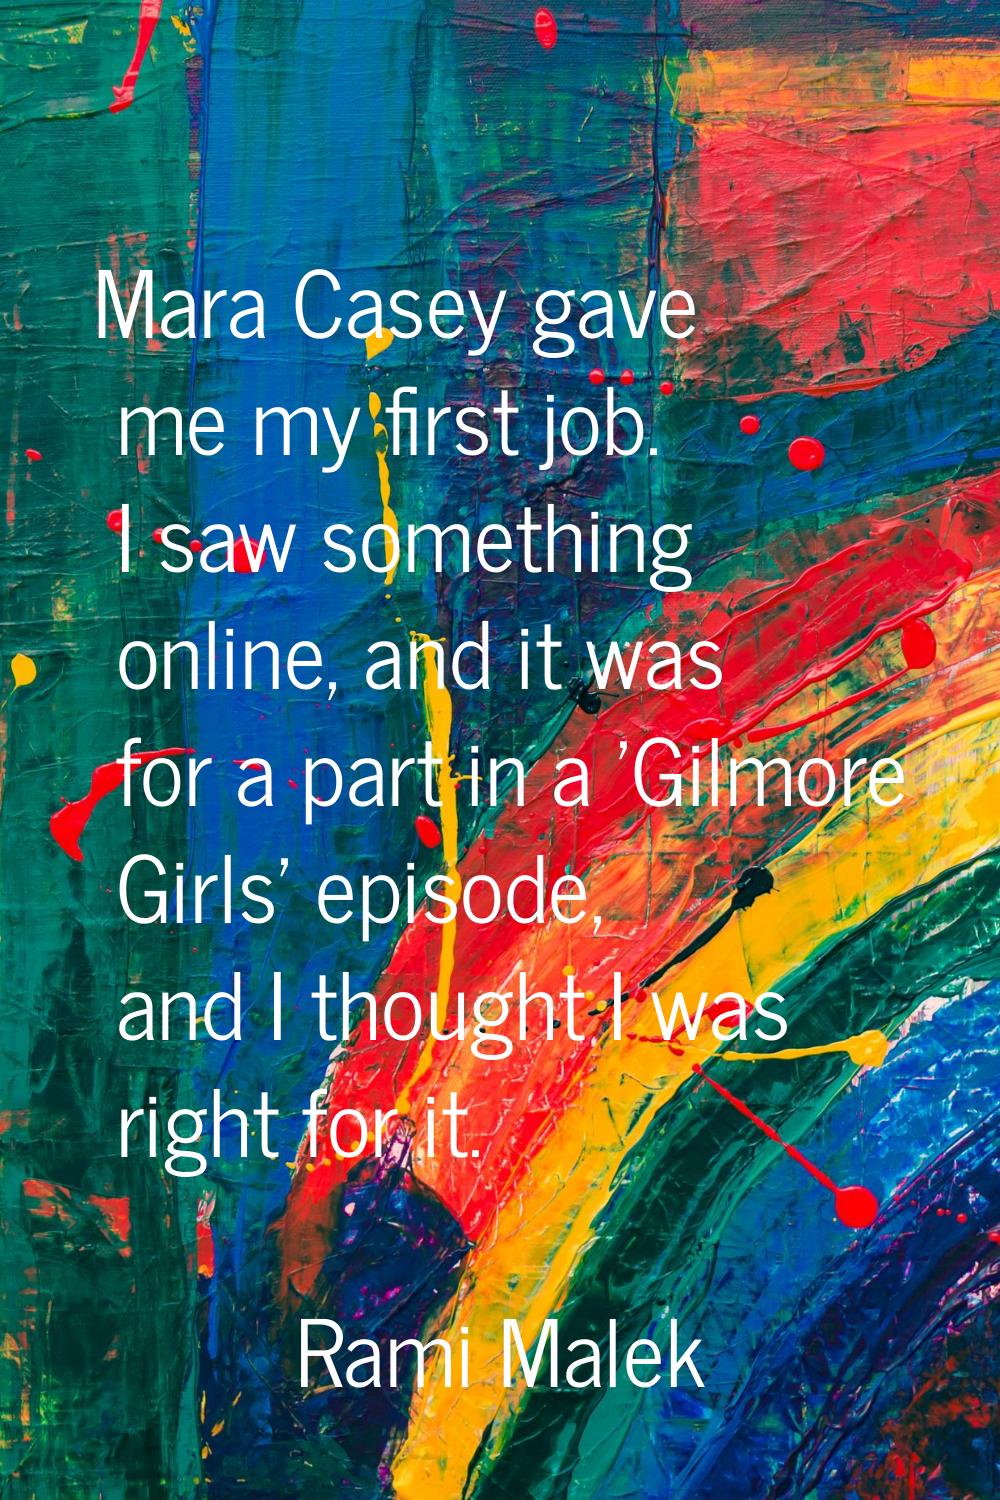 Mara Casey gave me my first job. I saw something online, and it was for a part in a 'Gilmore Girls'